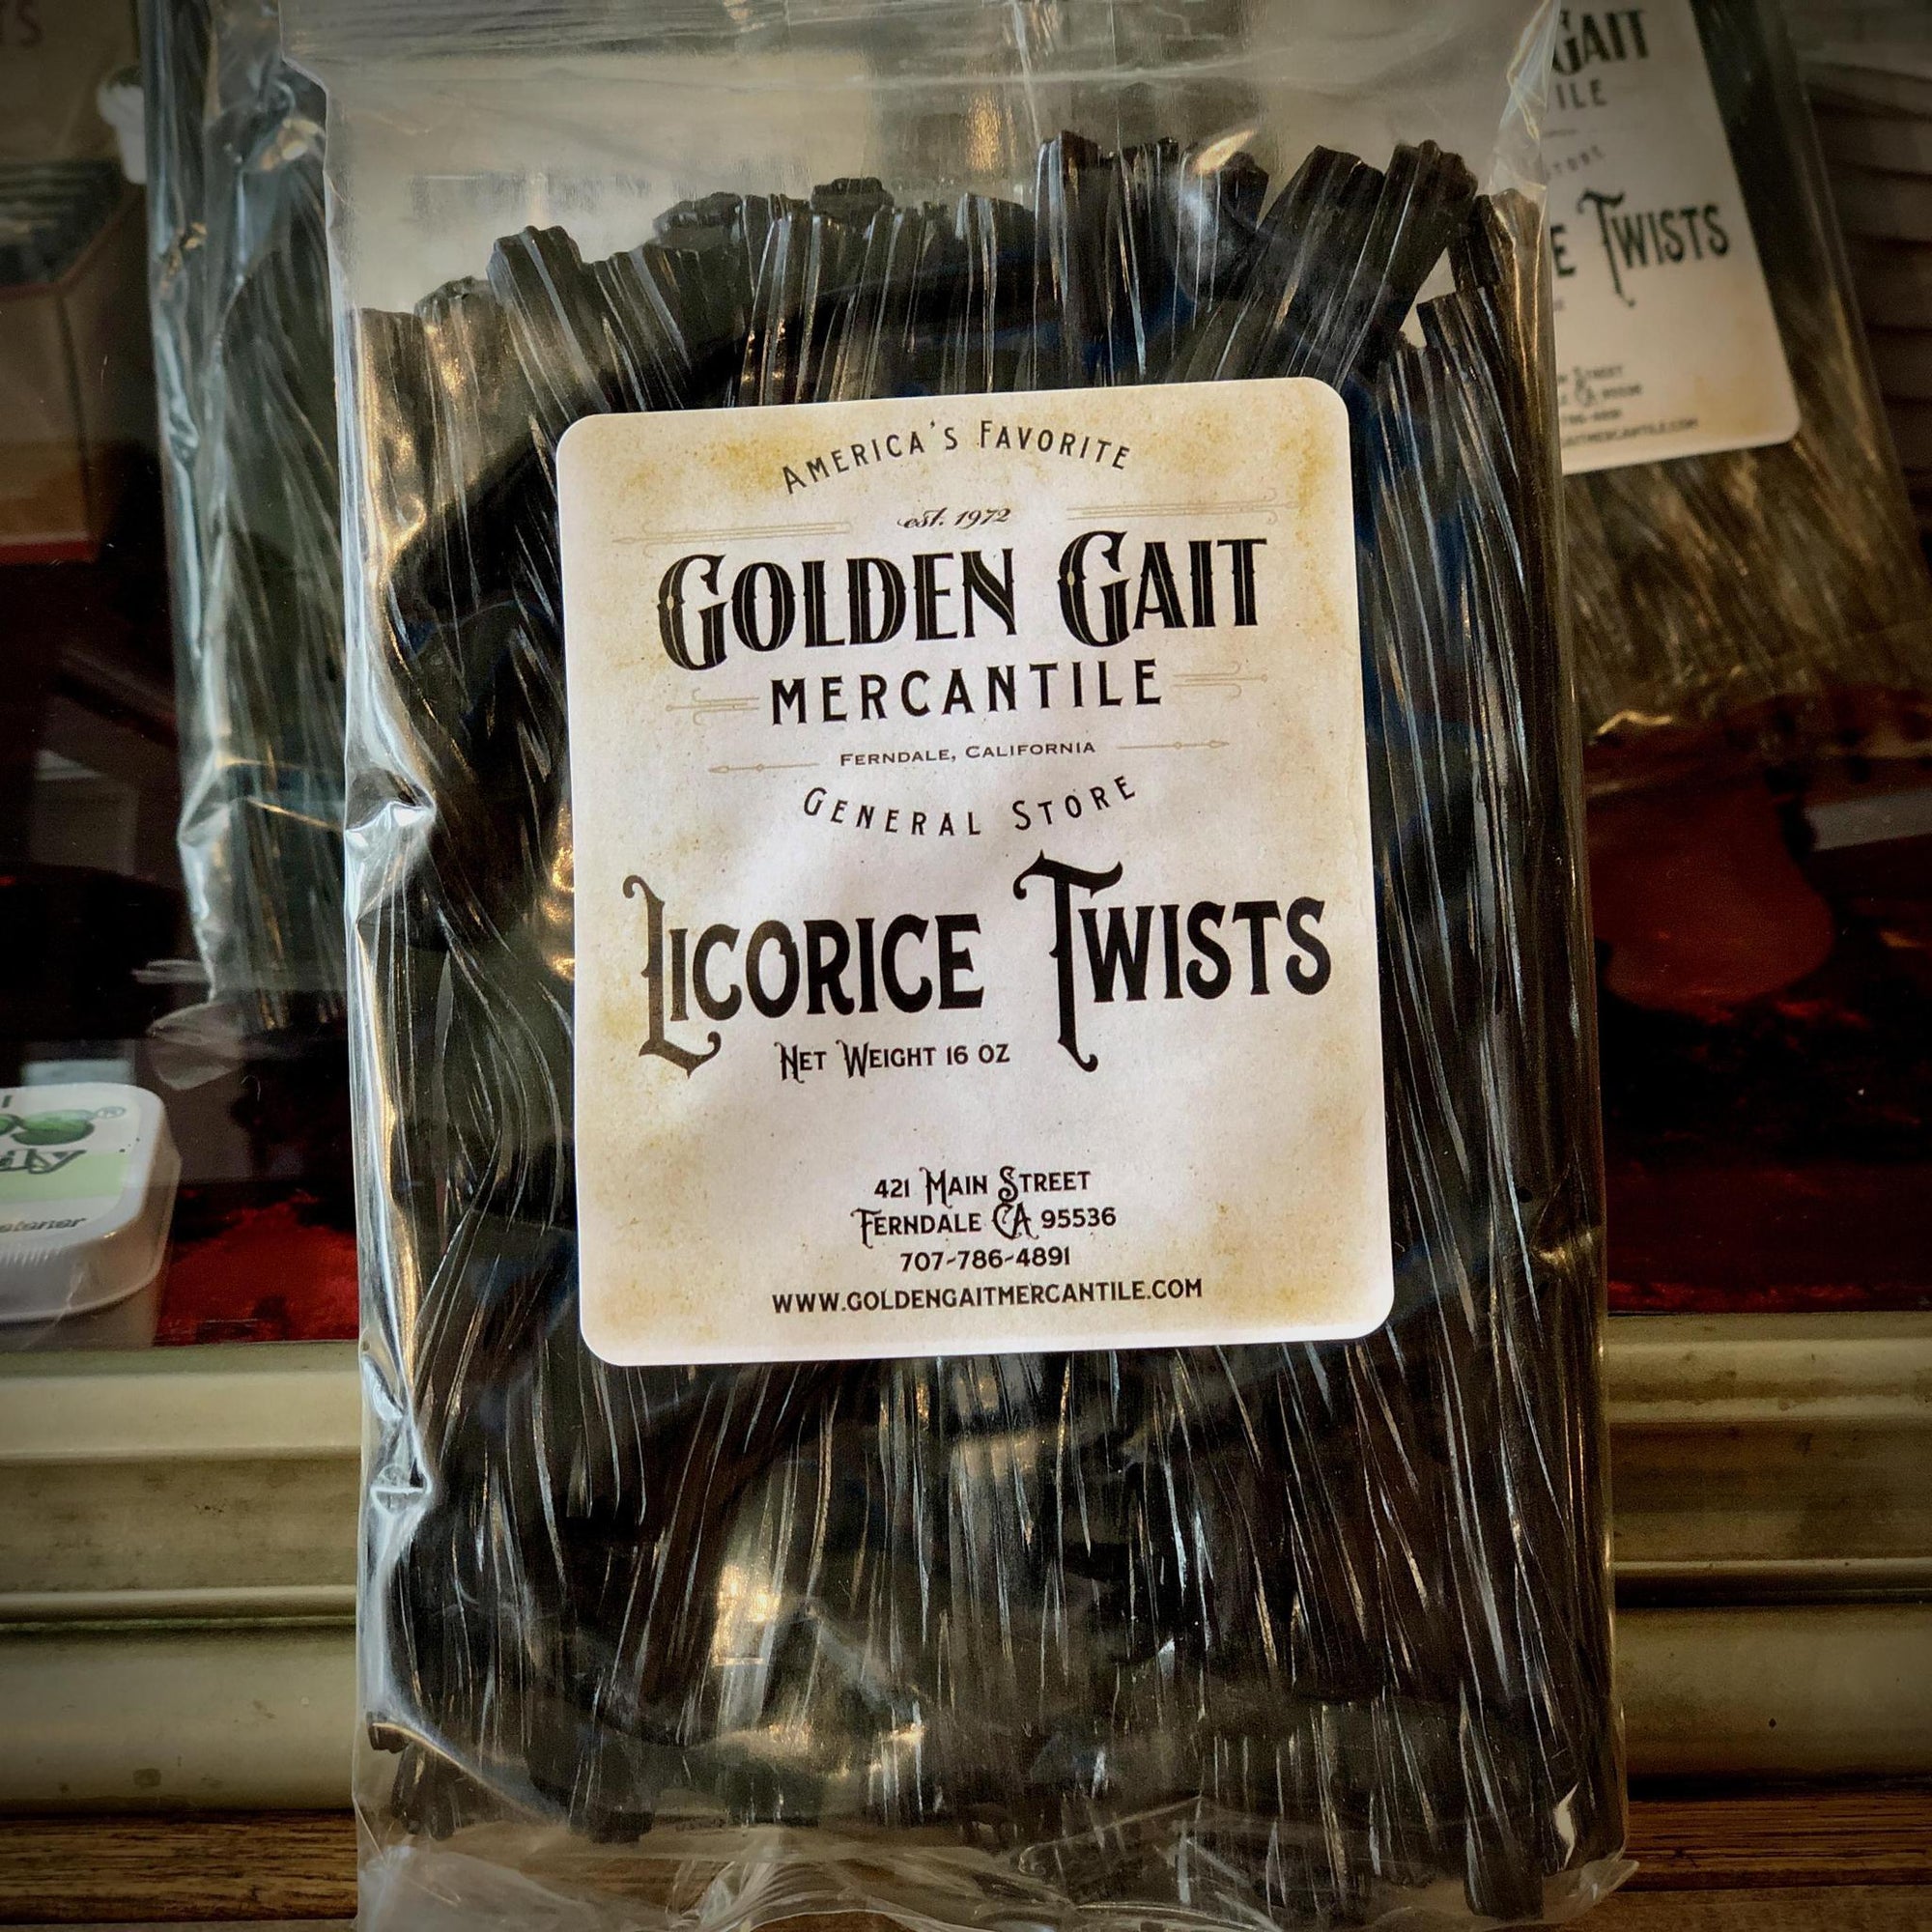 Black Licorice Twists By The Golden Gait Mercantile